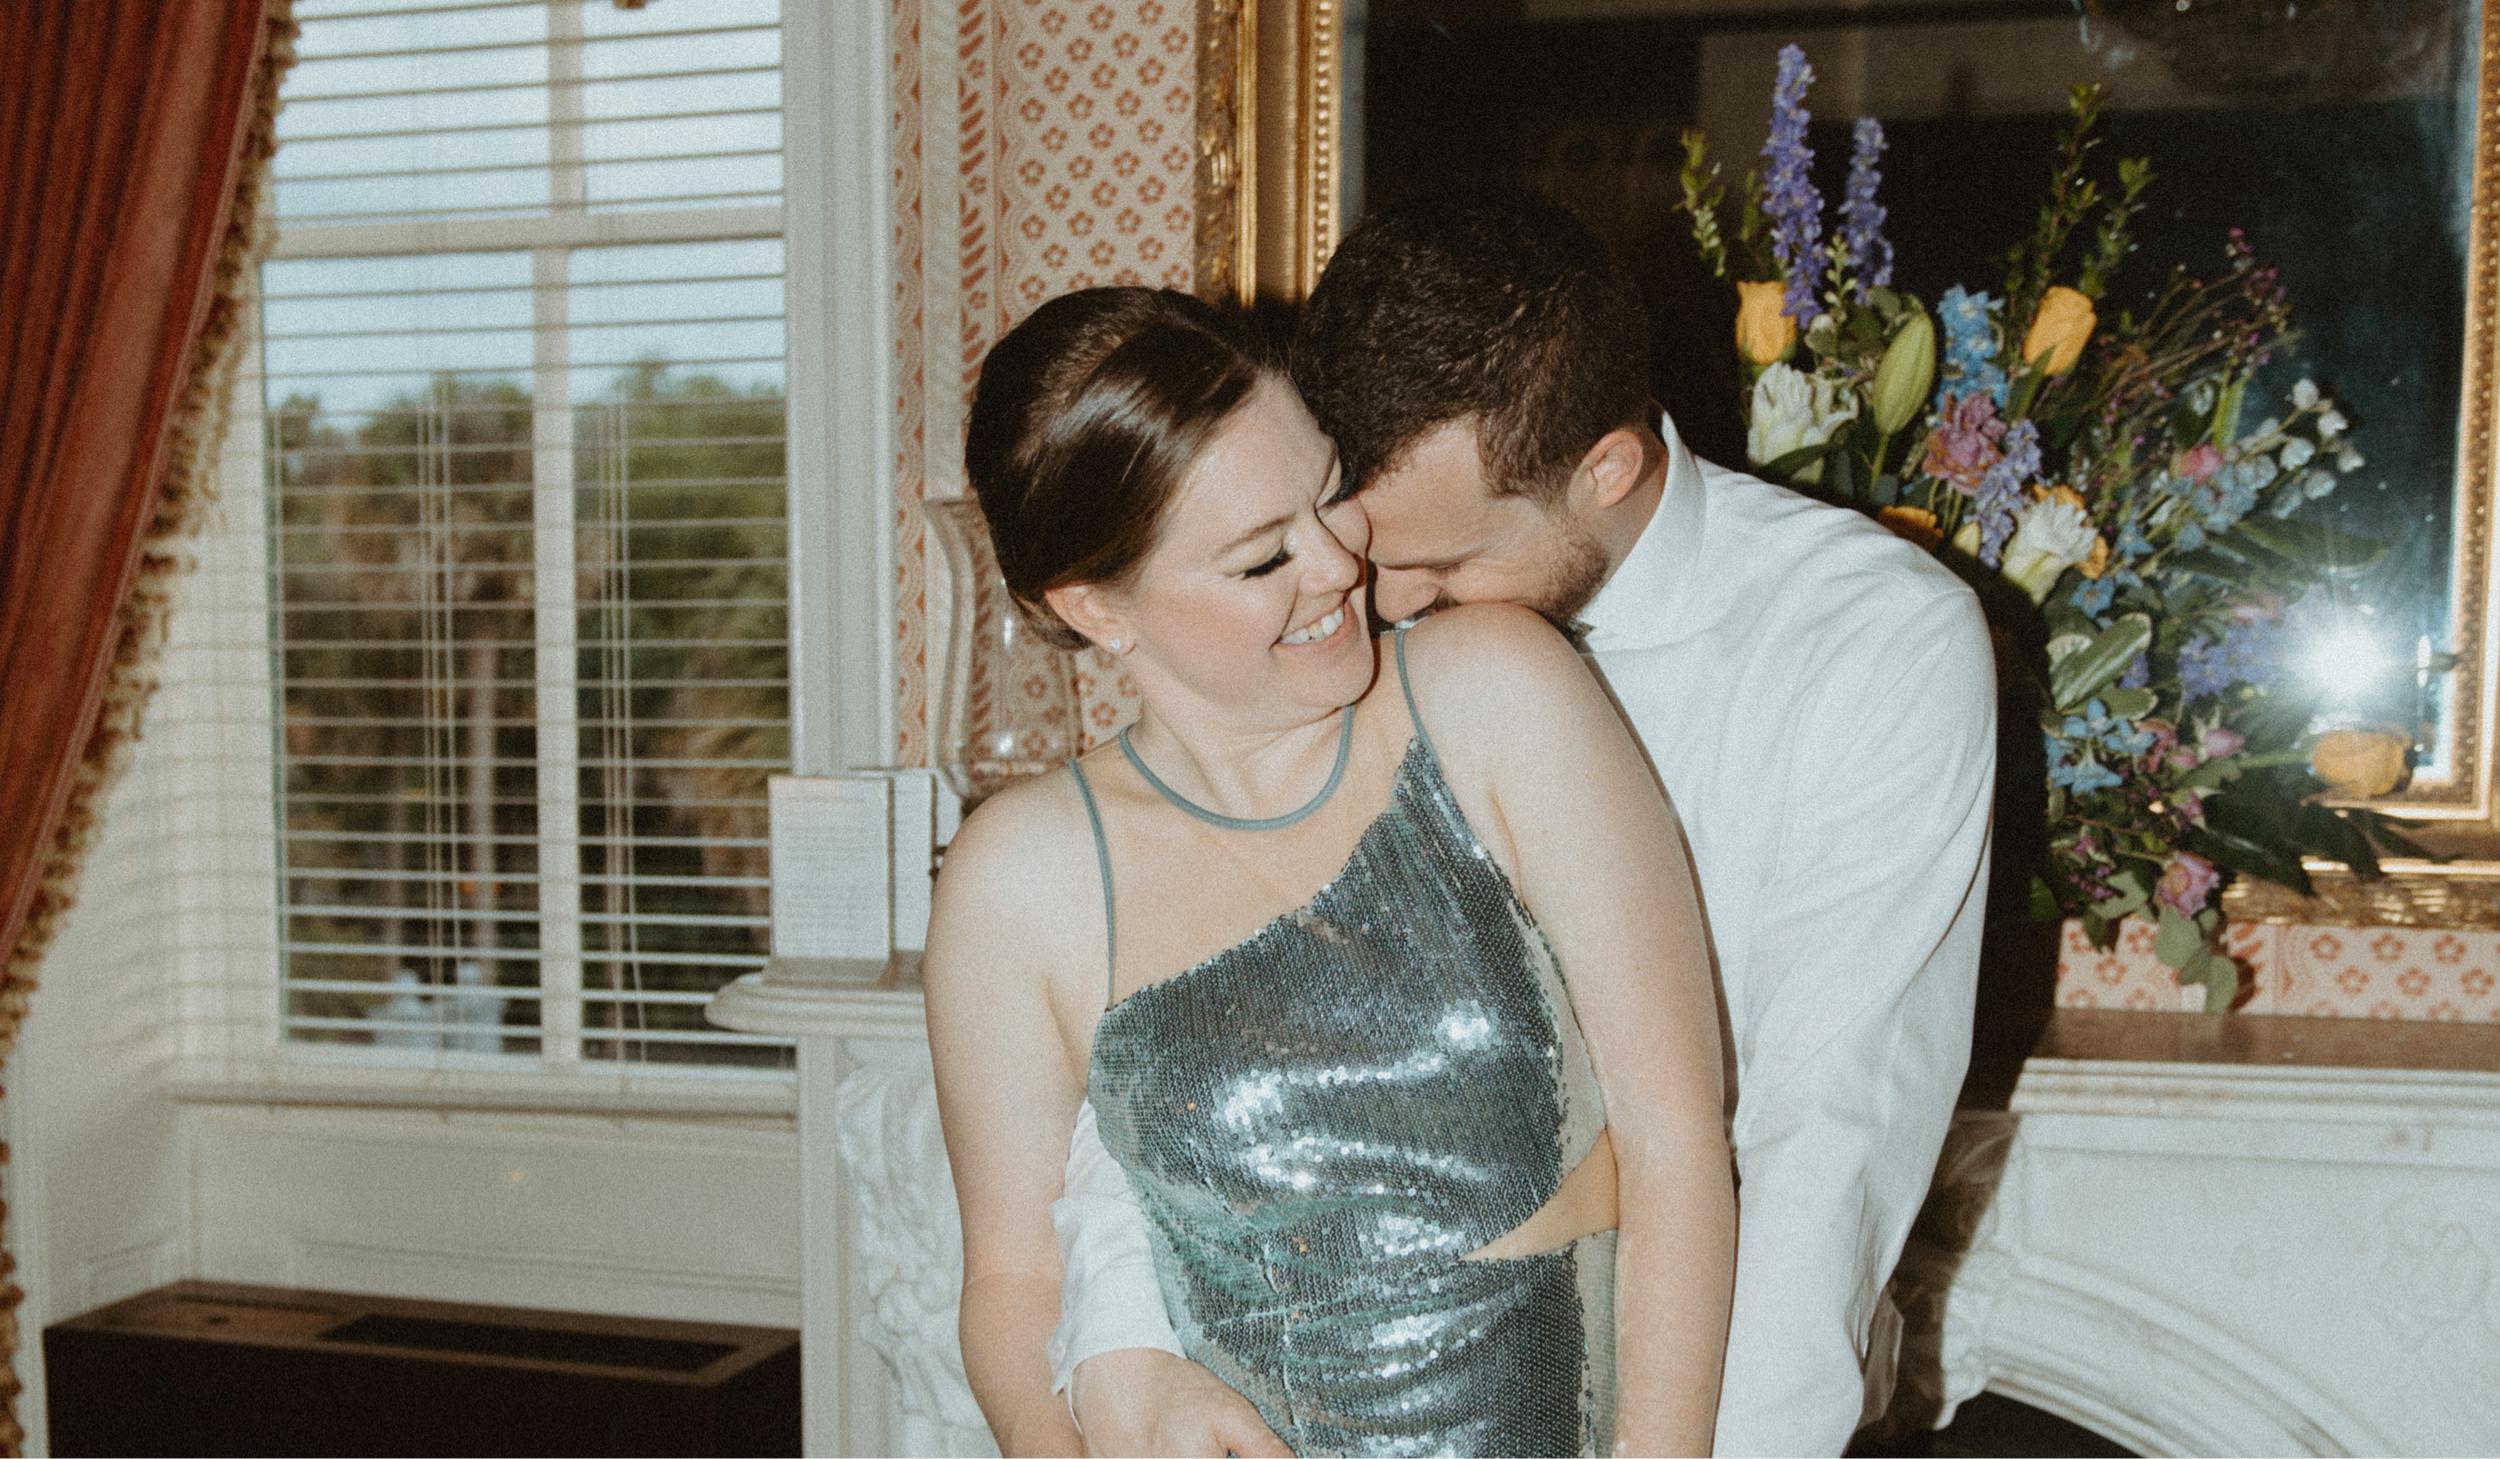 The Wedding Website of Elizabeth Young and Steven Reyna